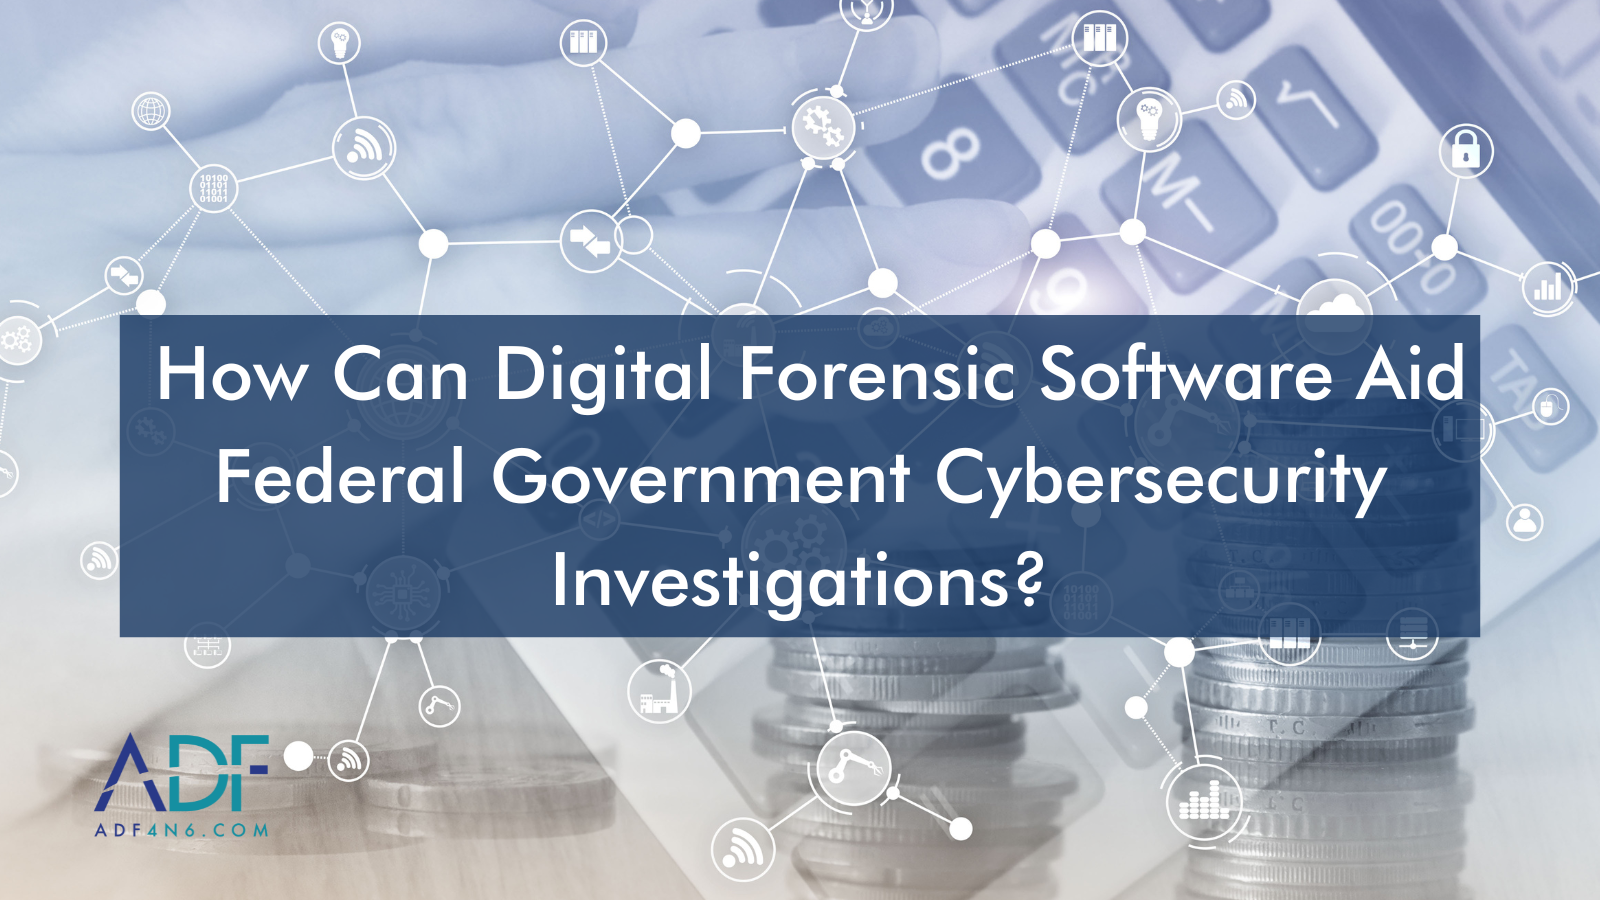 How Can Digital Forensic Software Aid Federal Cybersecurity?